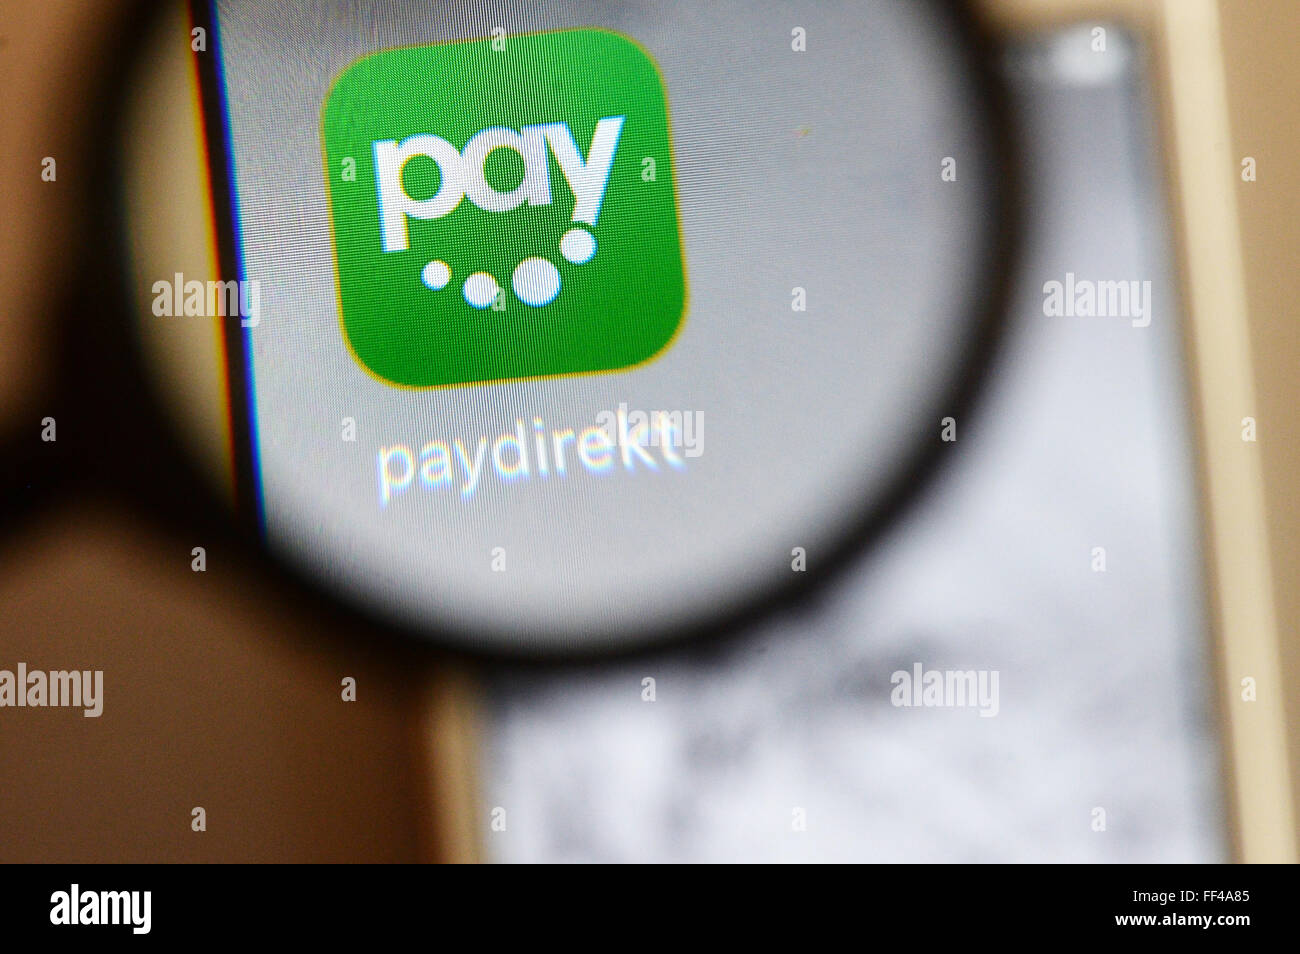 Berlin, Germany. 03rd Feb, 2016. ILLUSTRATION - The logo of the online payment service Paydirekt pictured on a smarthpone in Berlin, Germany, 03 February 2016. Paydirekt is a German company with a strict data protection policy that will not reroute funds to intermediary payment service providers. Payment transactions are included in regular account statements. Photo: JENS KALAENE/dpa/Alamy Live News Stock Photo